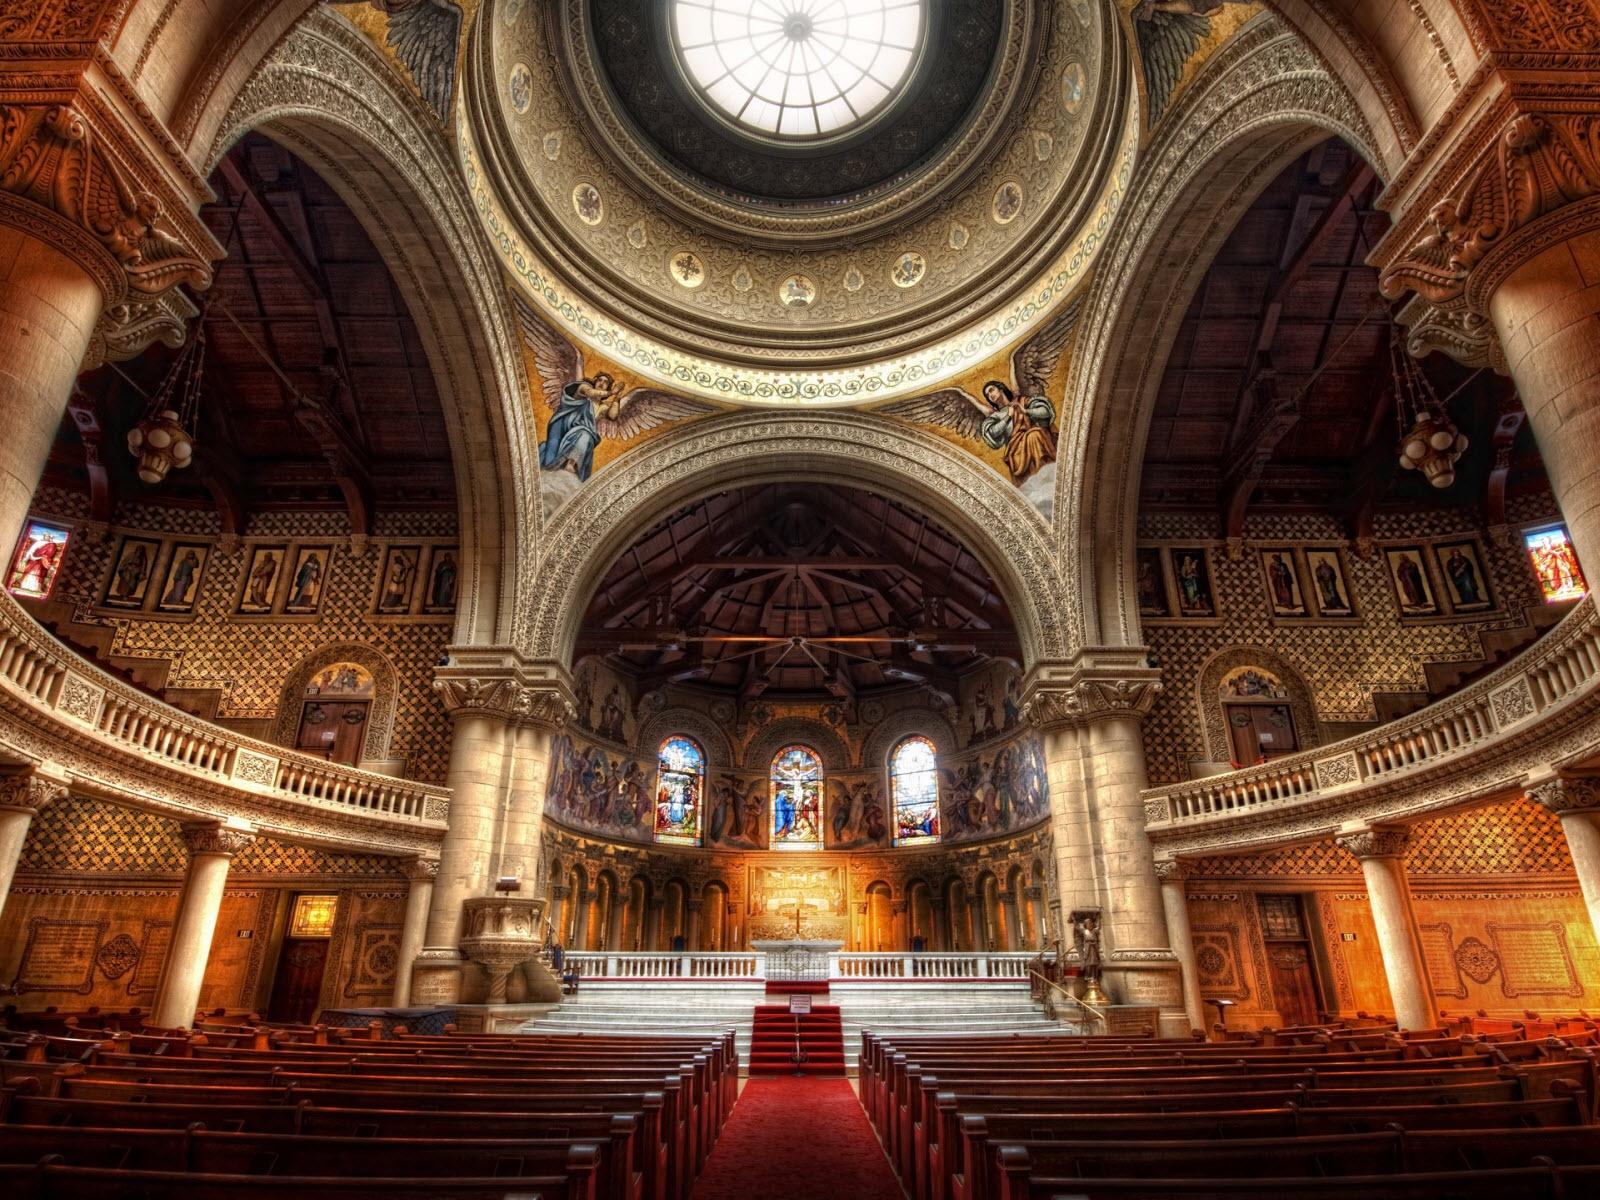 The Glorious Church at Stanford Wallpaper in jpg format